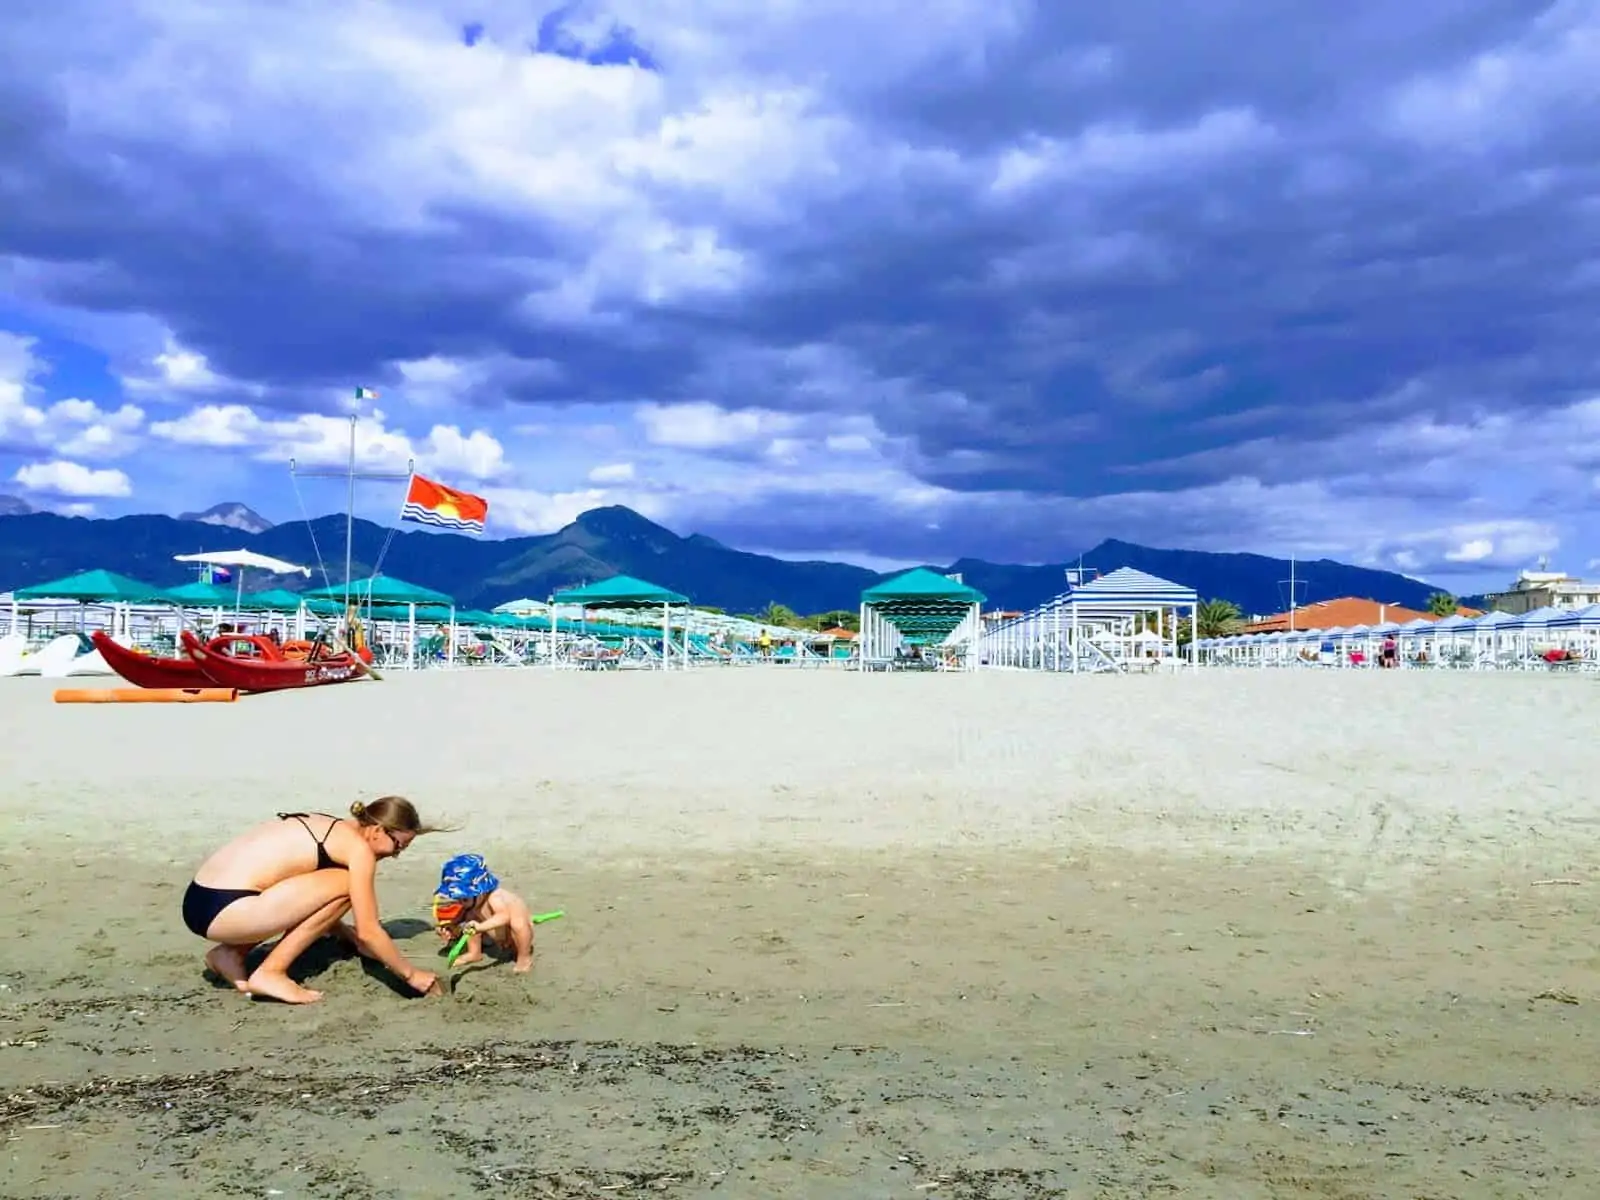 mom and boy play in the sand on the beach in forte dei marmi, italy